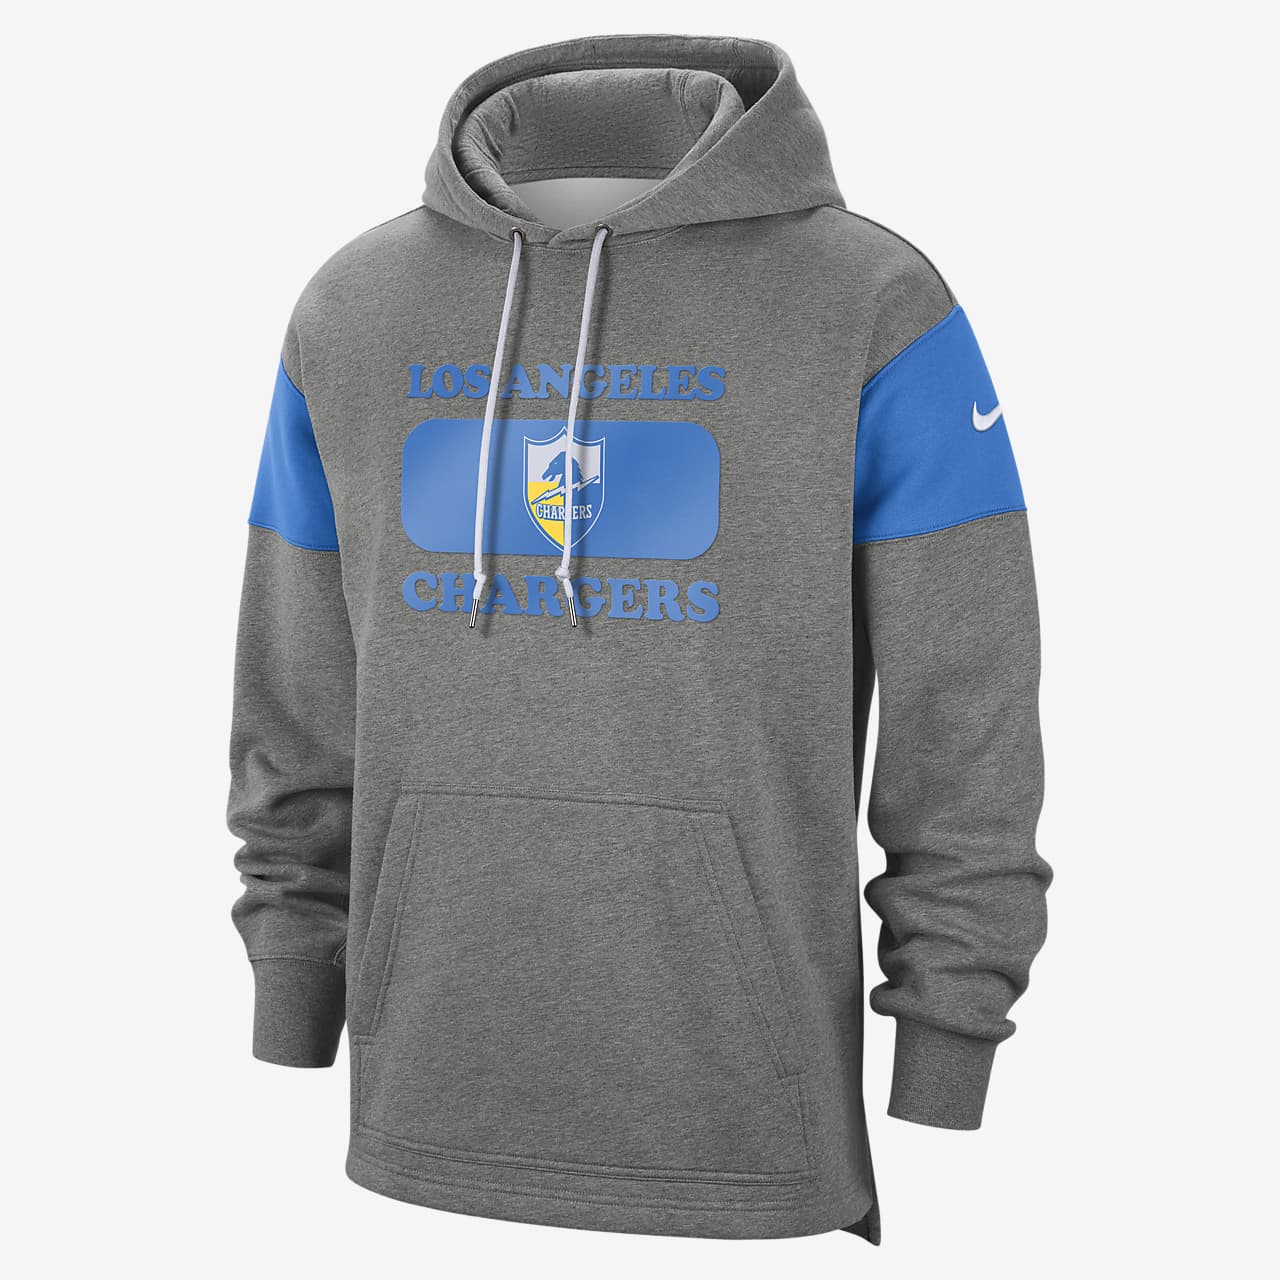 NFL Chargers) Men's Pullover Hoodie 